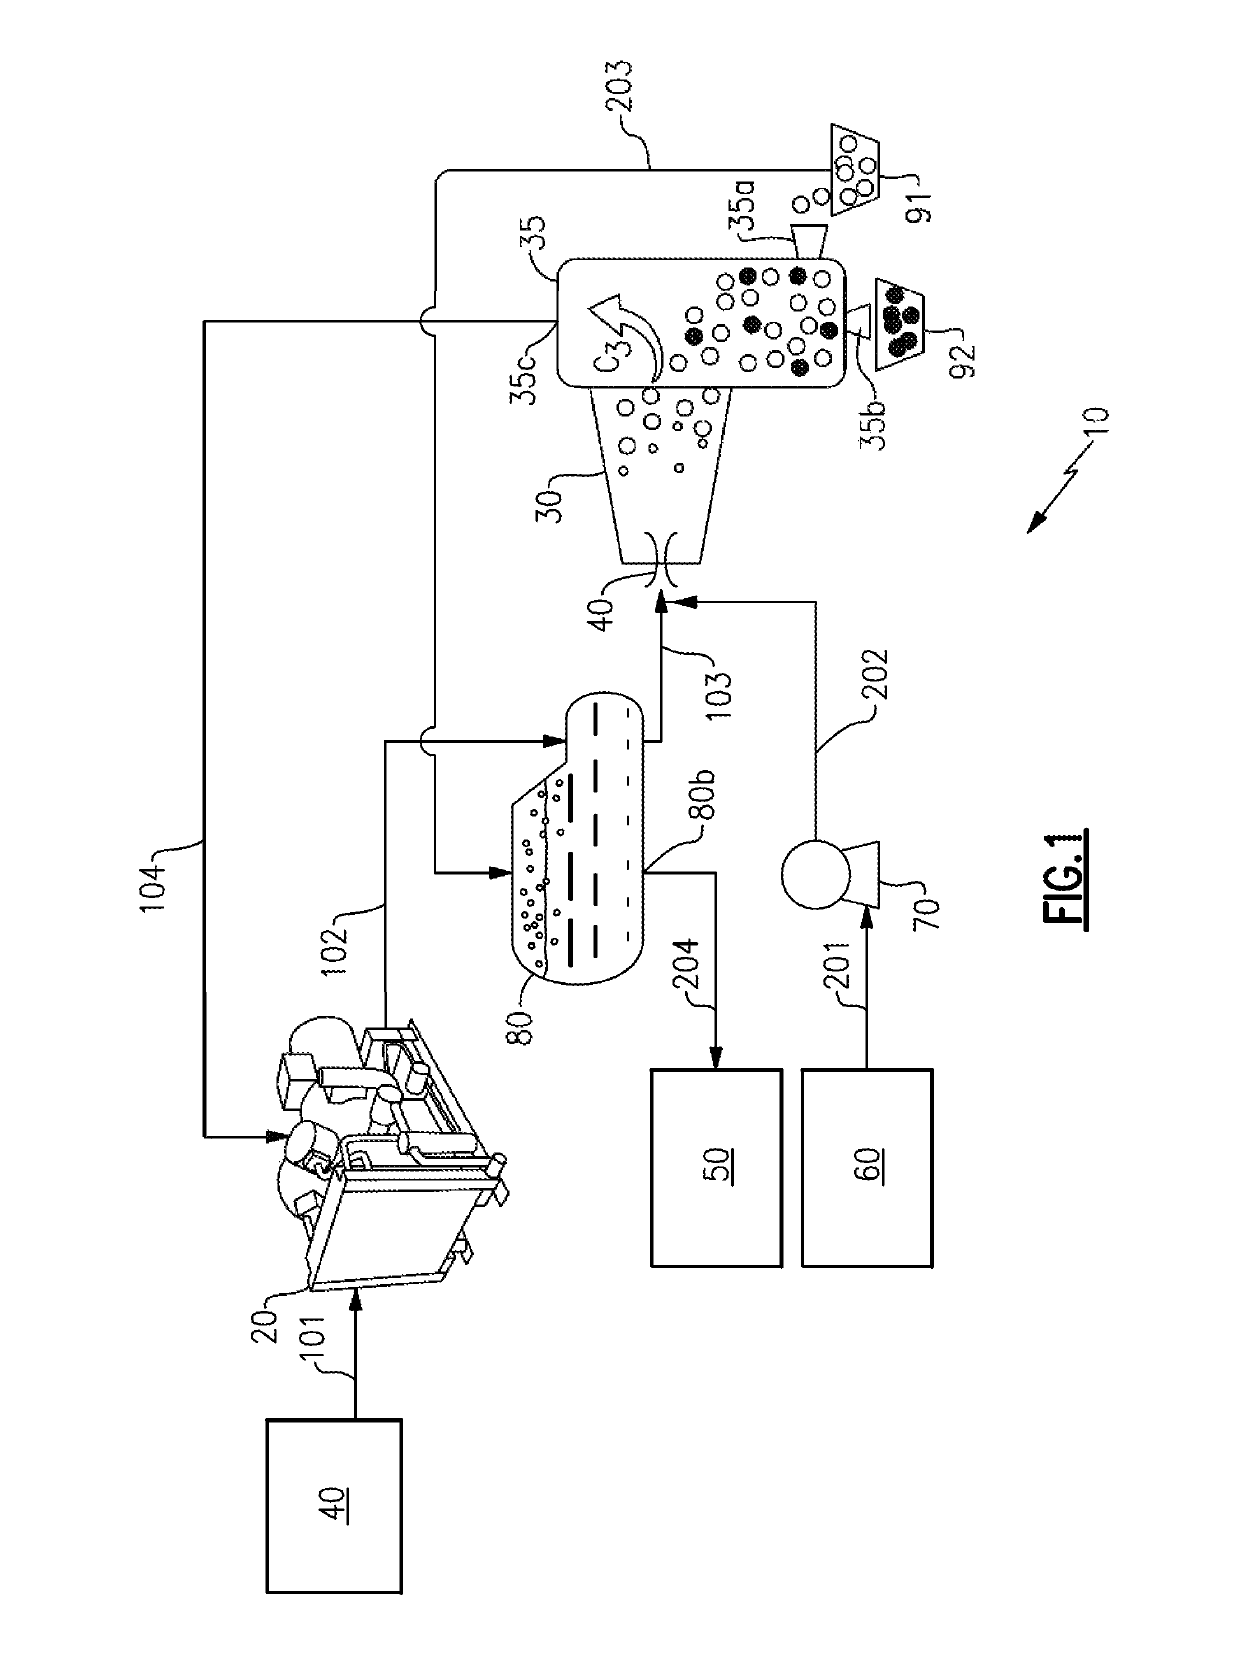 Water desalination system and method for fast cooling saline water using turbines